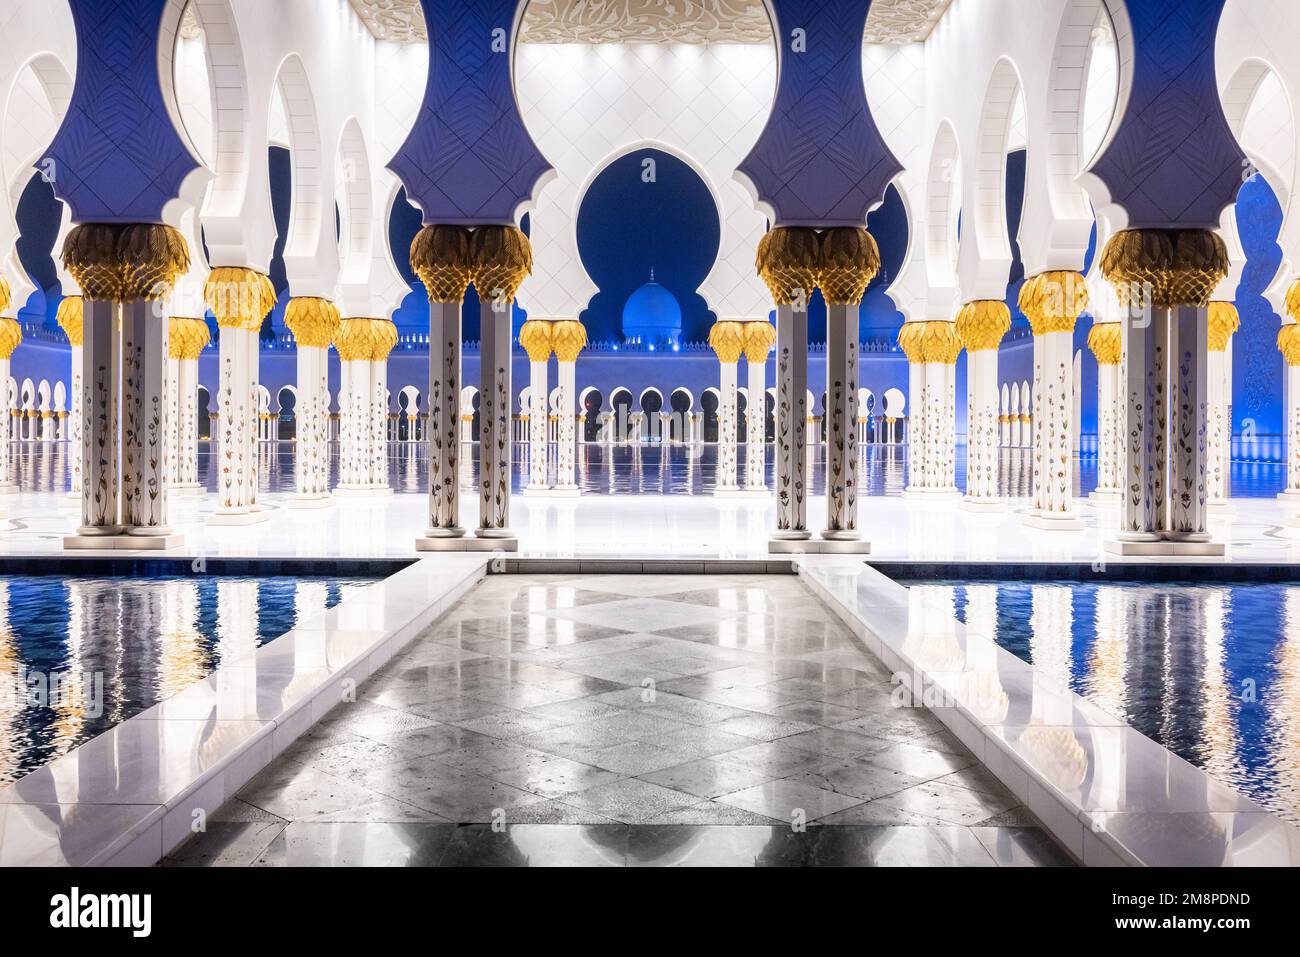 Symmetrical nightshot of the colonnade of the Sheik Zhayed mosque, with a marble catwalk surrounded by water Stock Photo